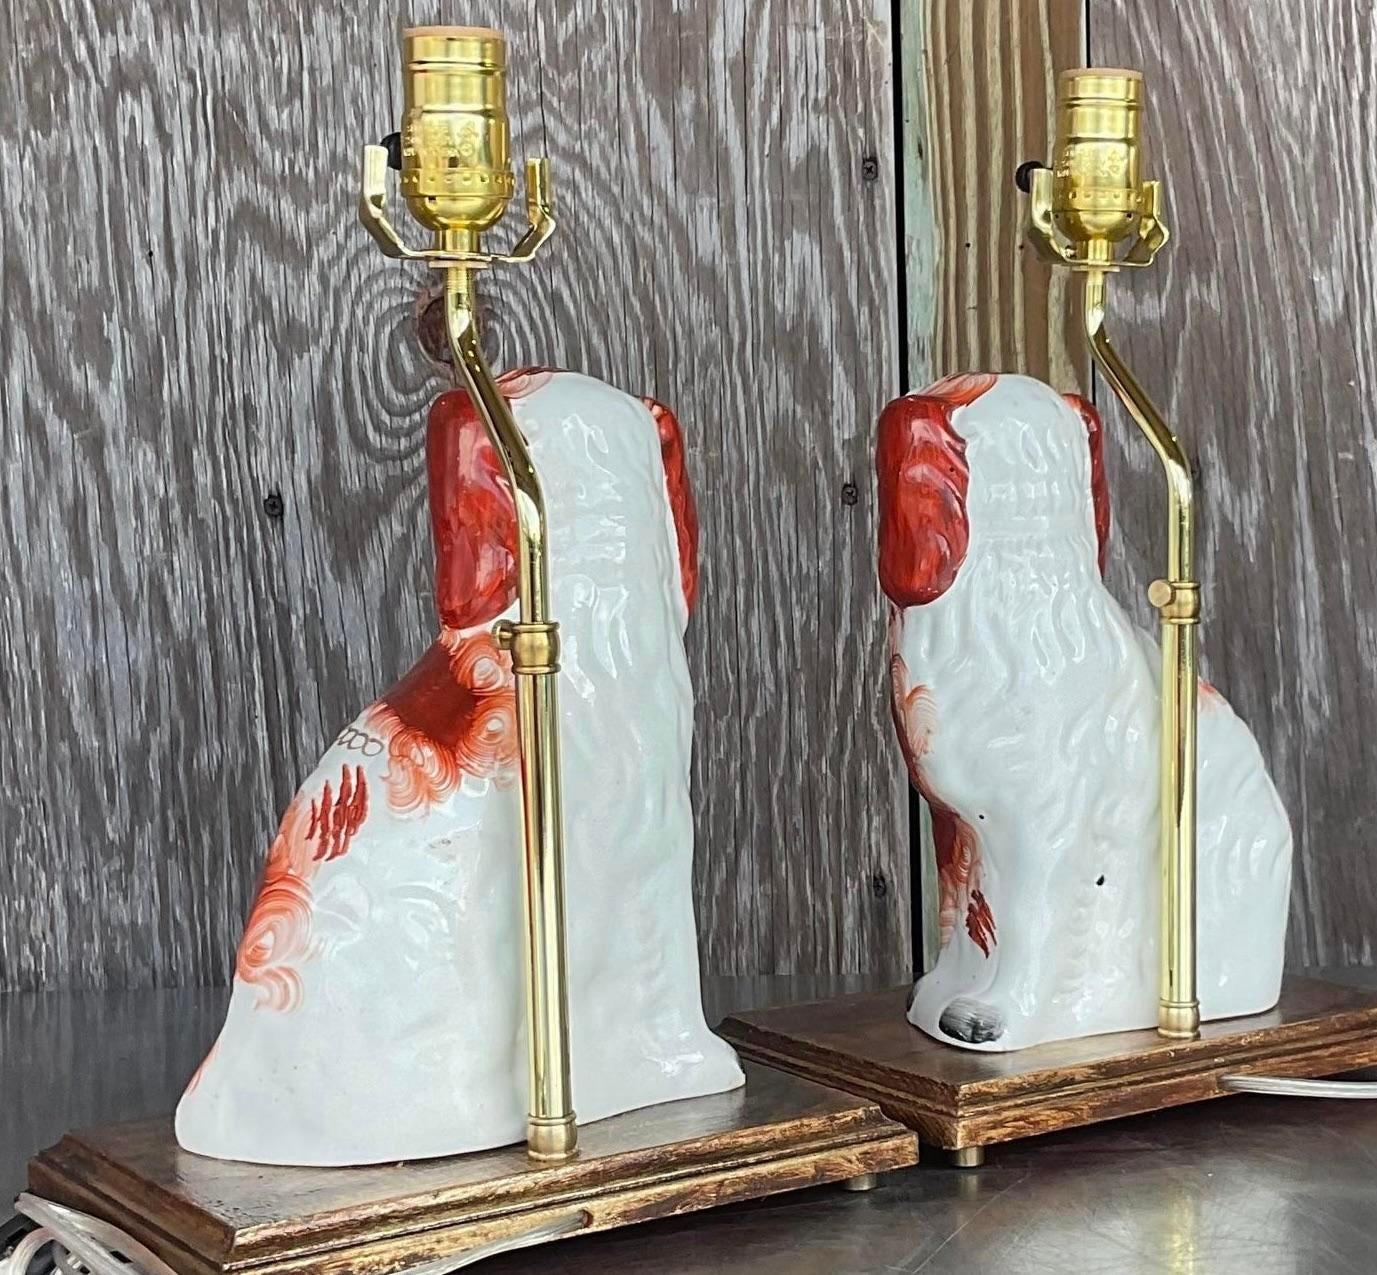 Illuminate your space with this pair of vintage Regency Staffordshire dog table lamps. Melding classic Regency style with American charm, these lamps showcase iconic Staffordshire dog designs, adding a timeless and playful touch to your décor